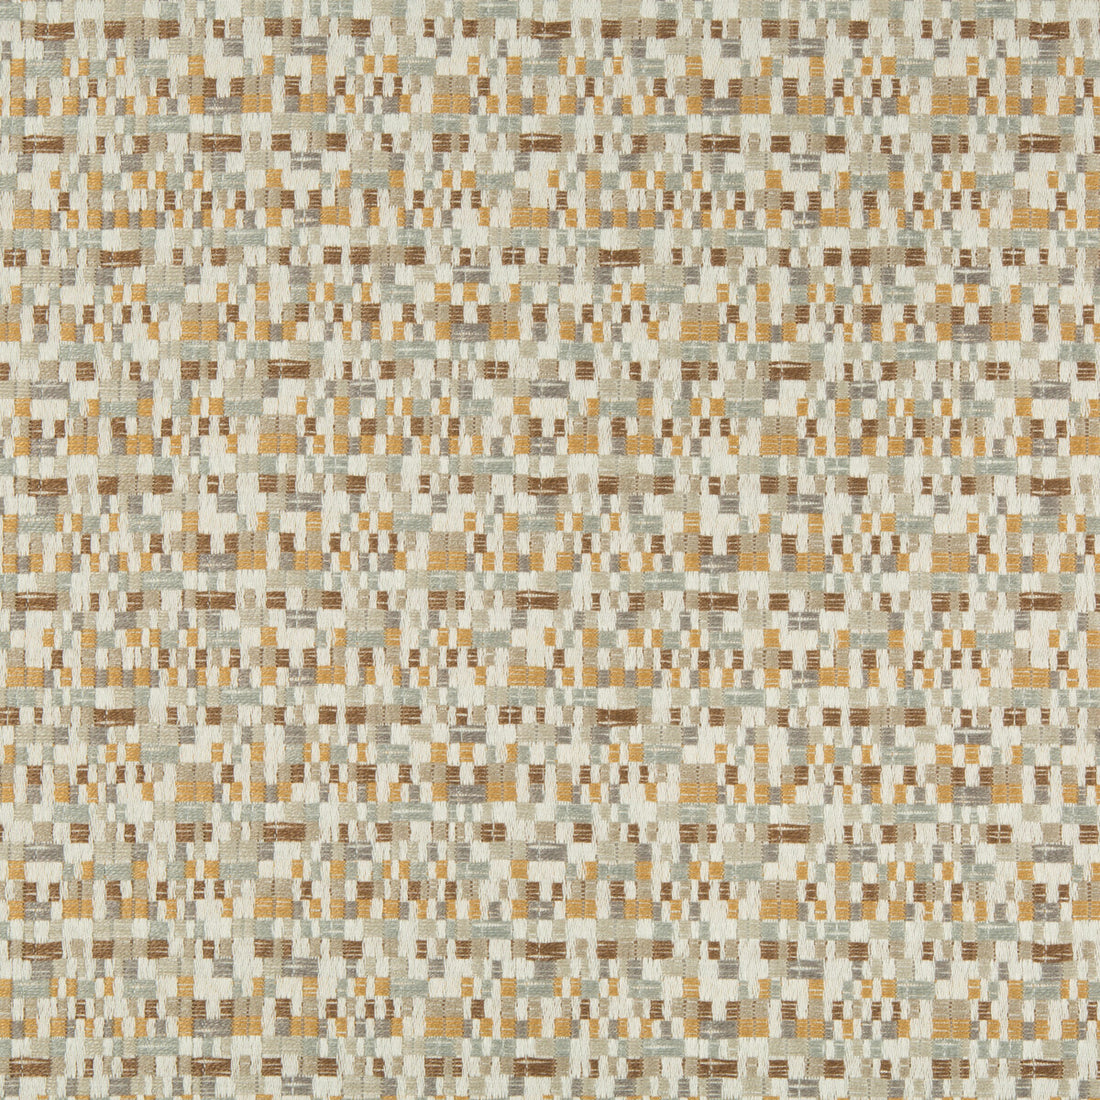 Kravet Design fabric in 34697-611 color - pattern 34697.611.0 - by Kravet Design in the Crypton Home collection